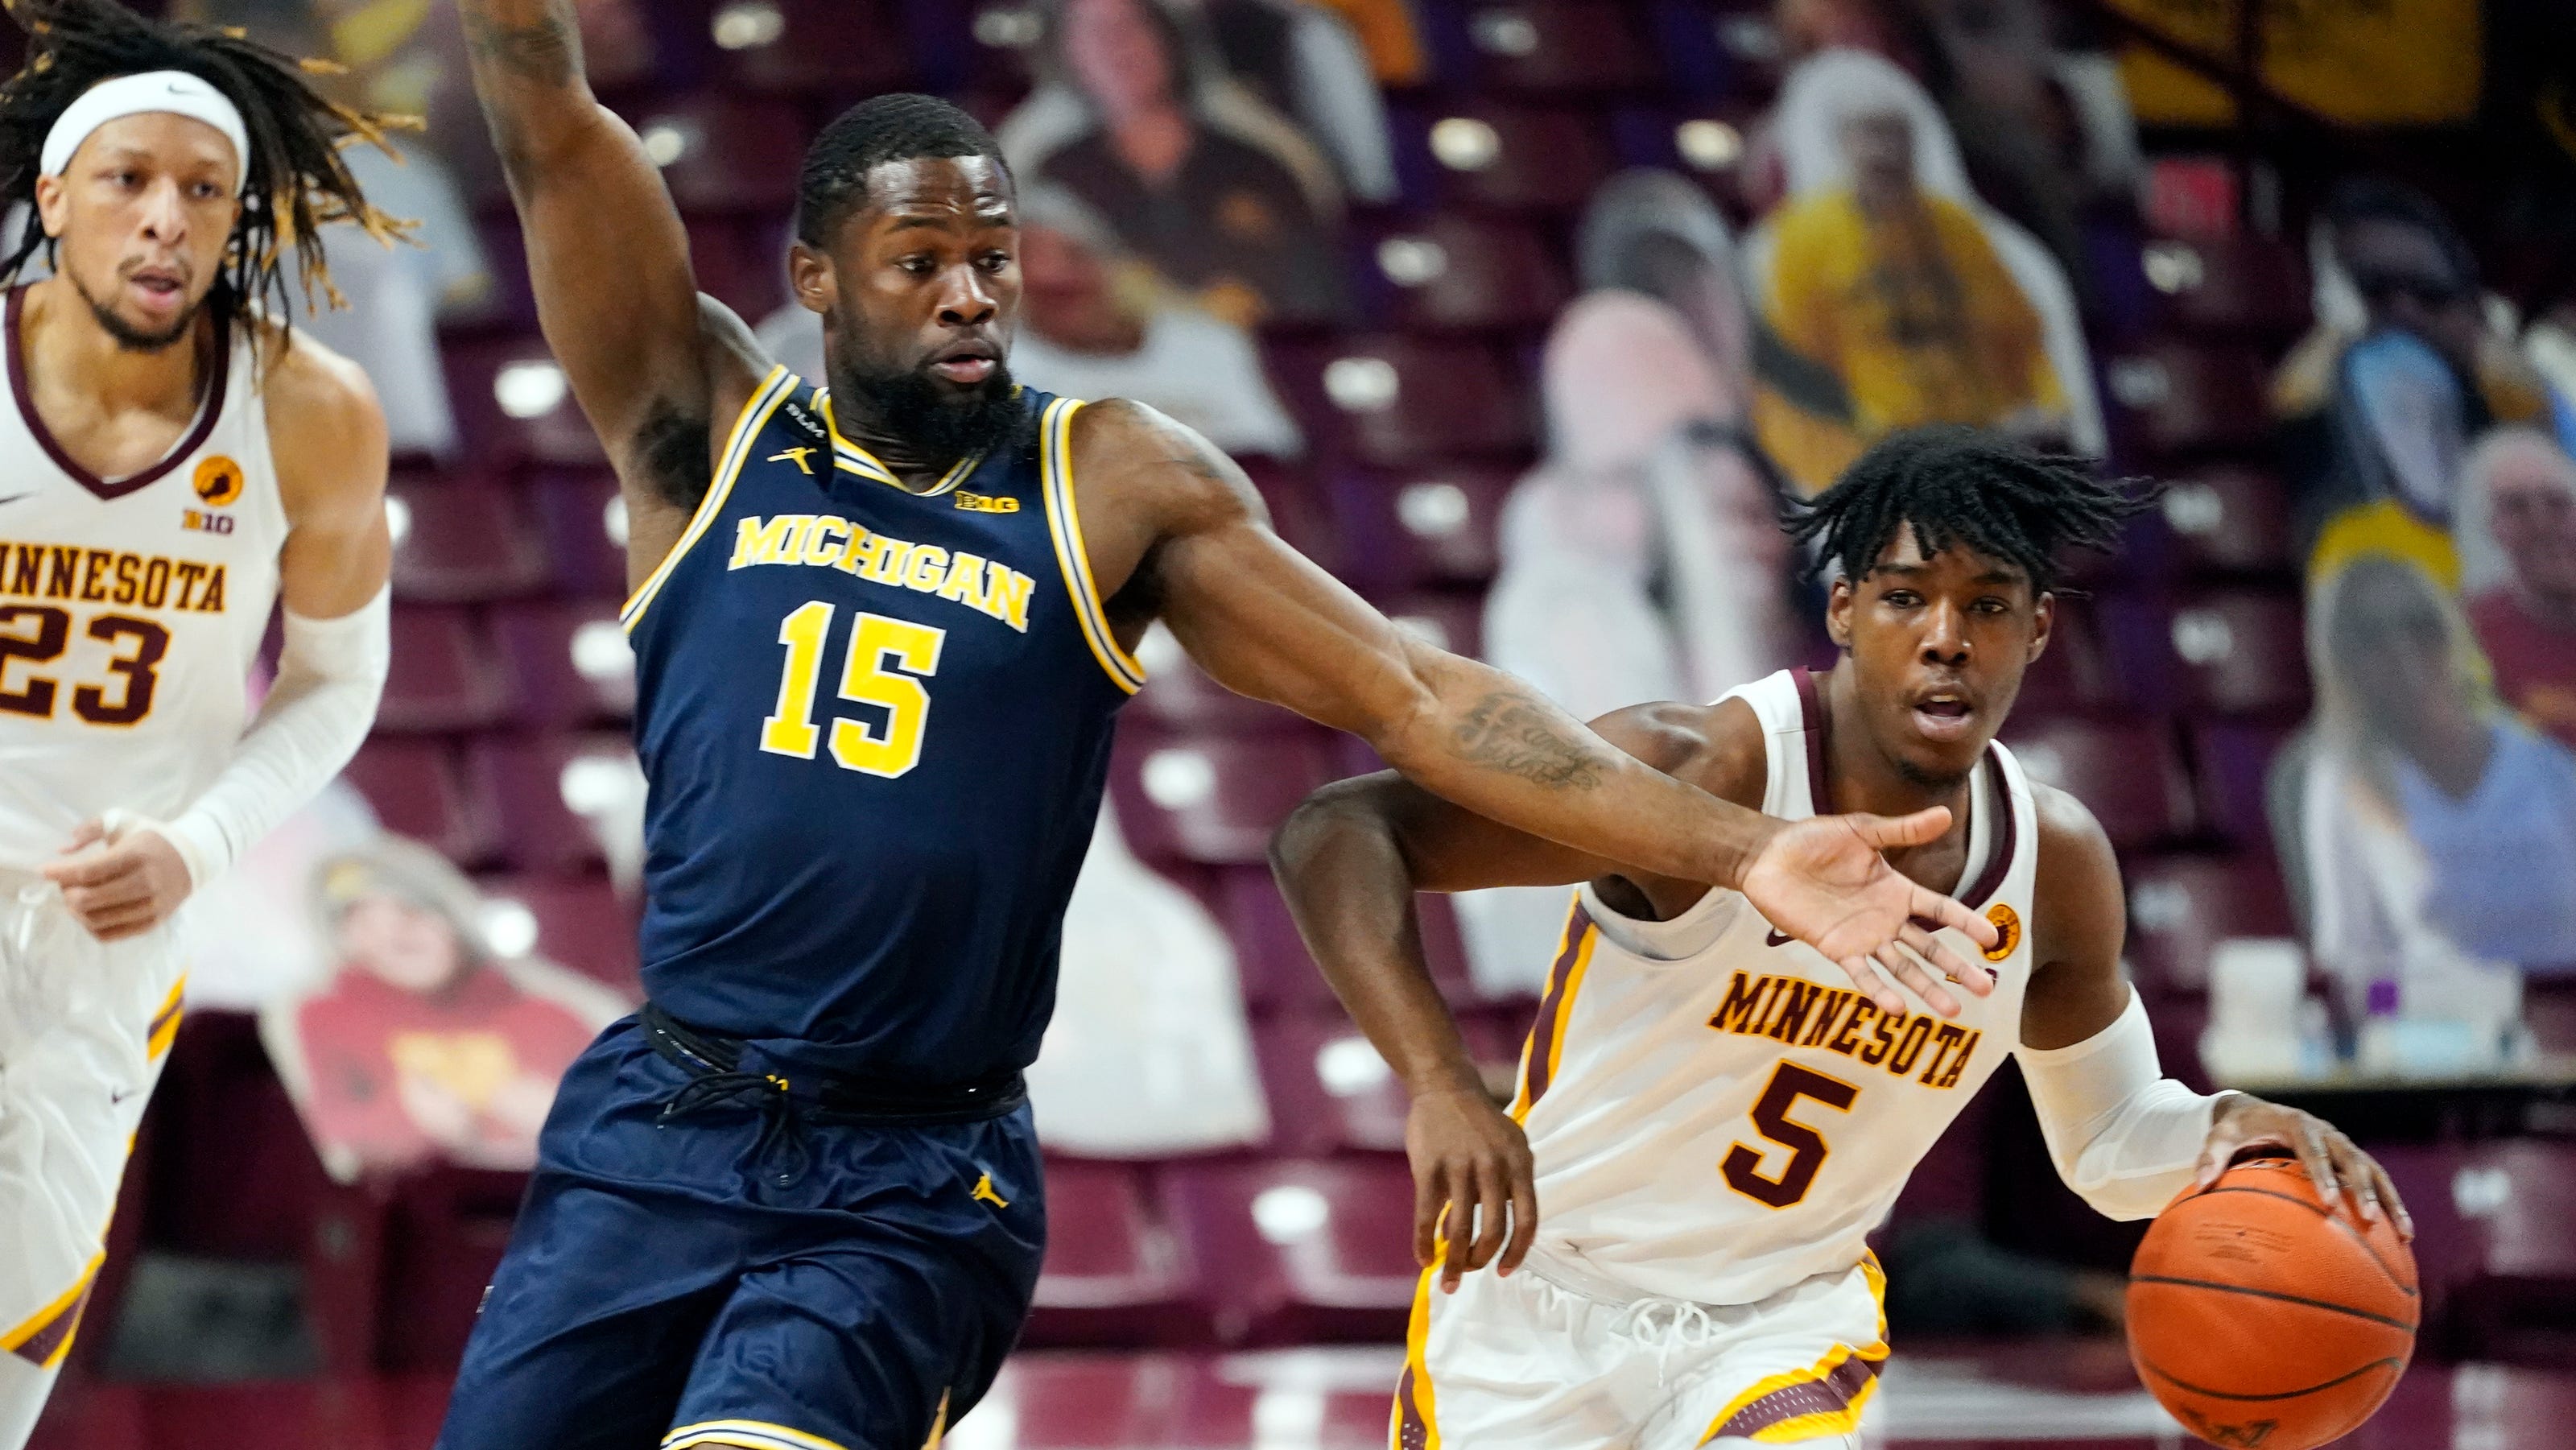 Why Michigan basketball isn't down after getting 'knocked down'